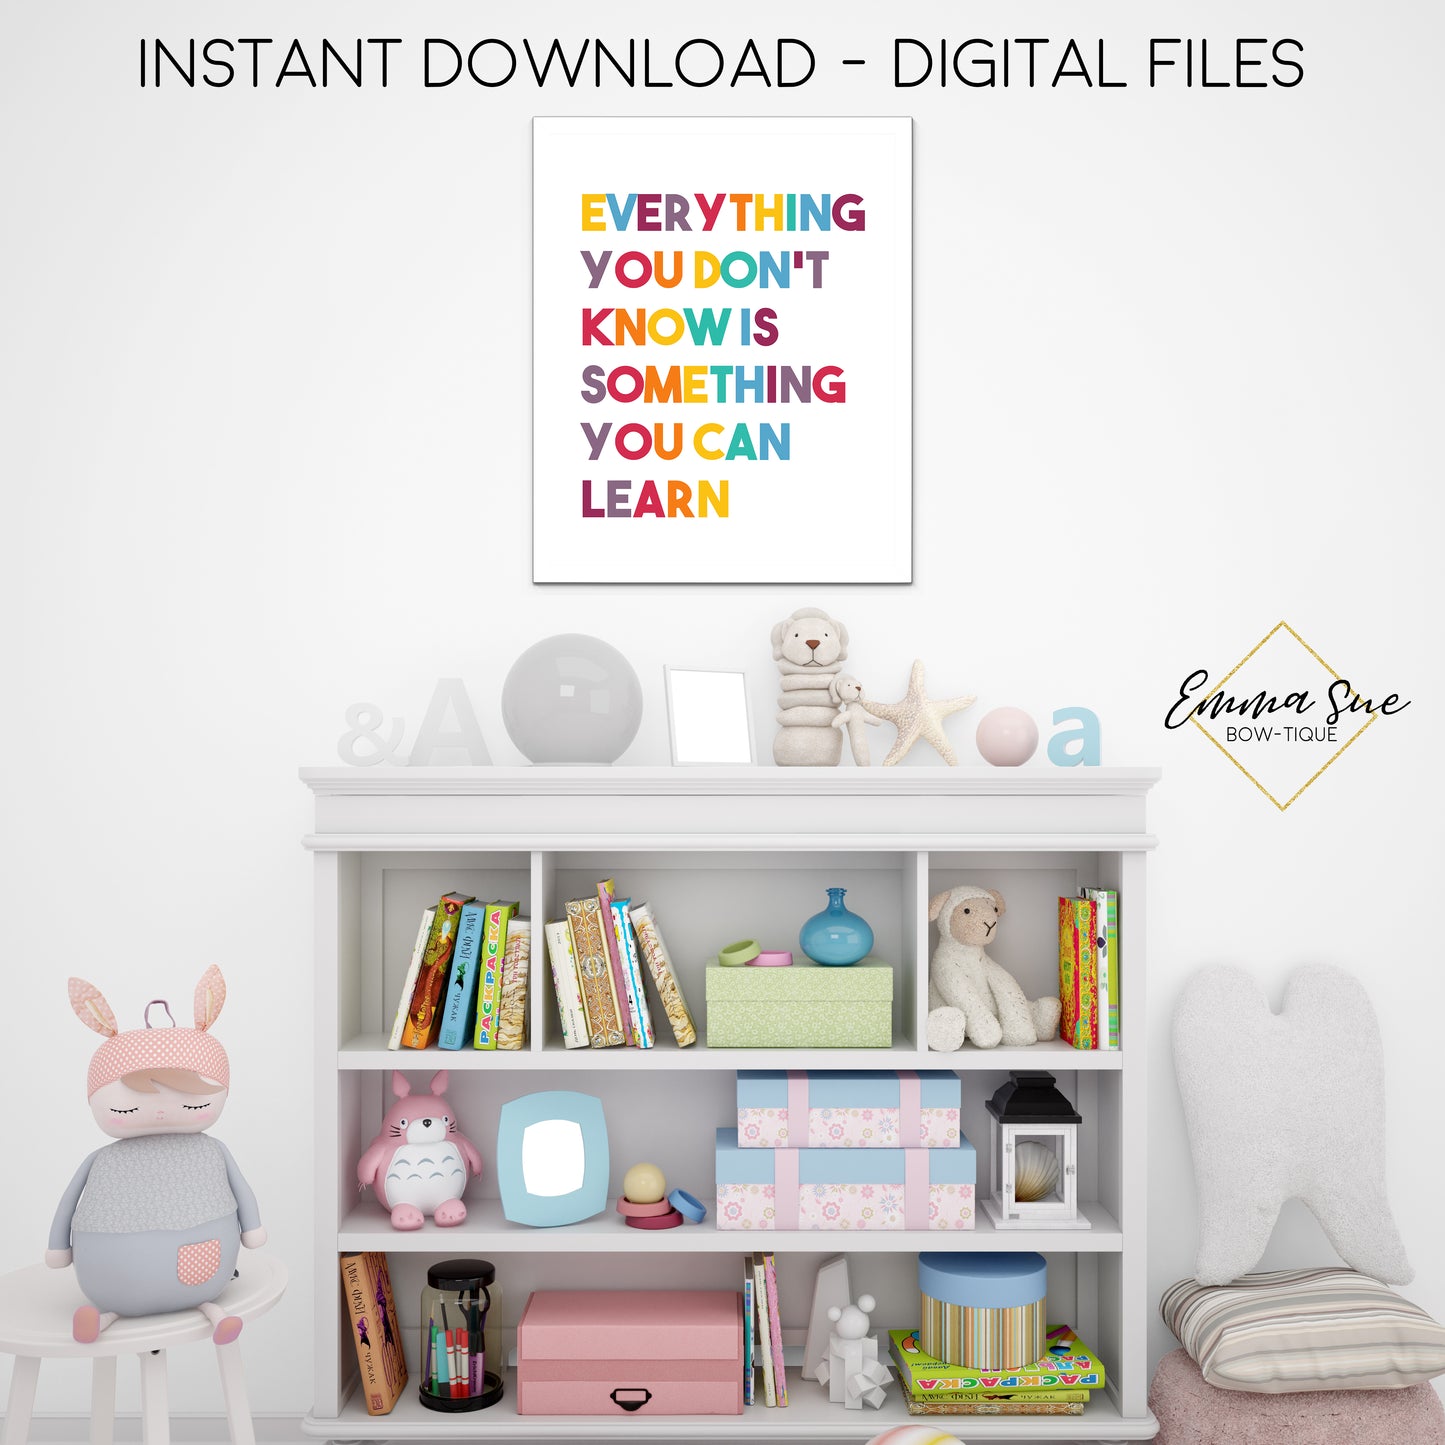 Everything you don't know is something you can learn - Kid's School Classroom or Playroom Inspirational Printable Wall Art  - Digital File